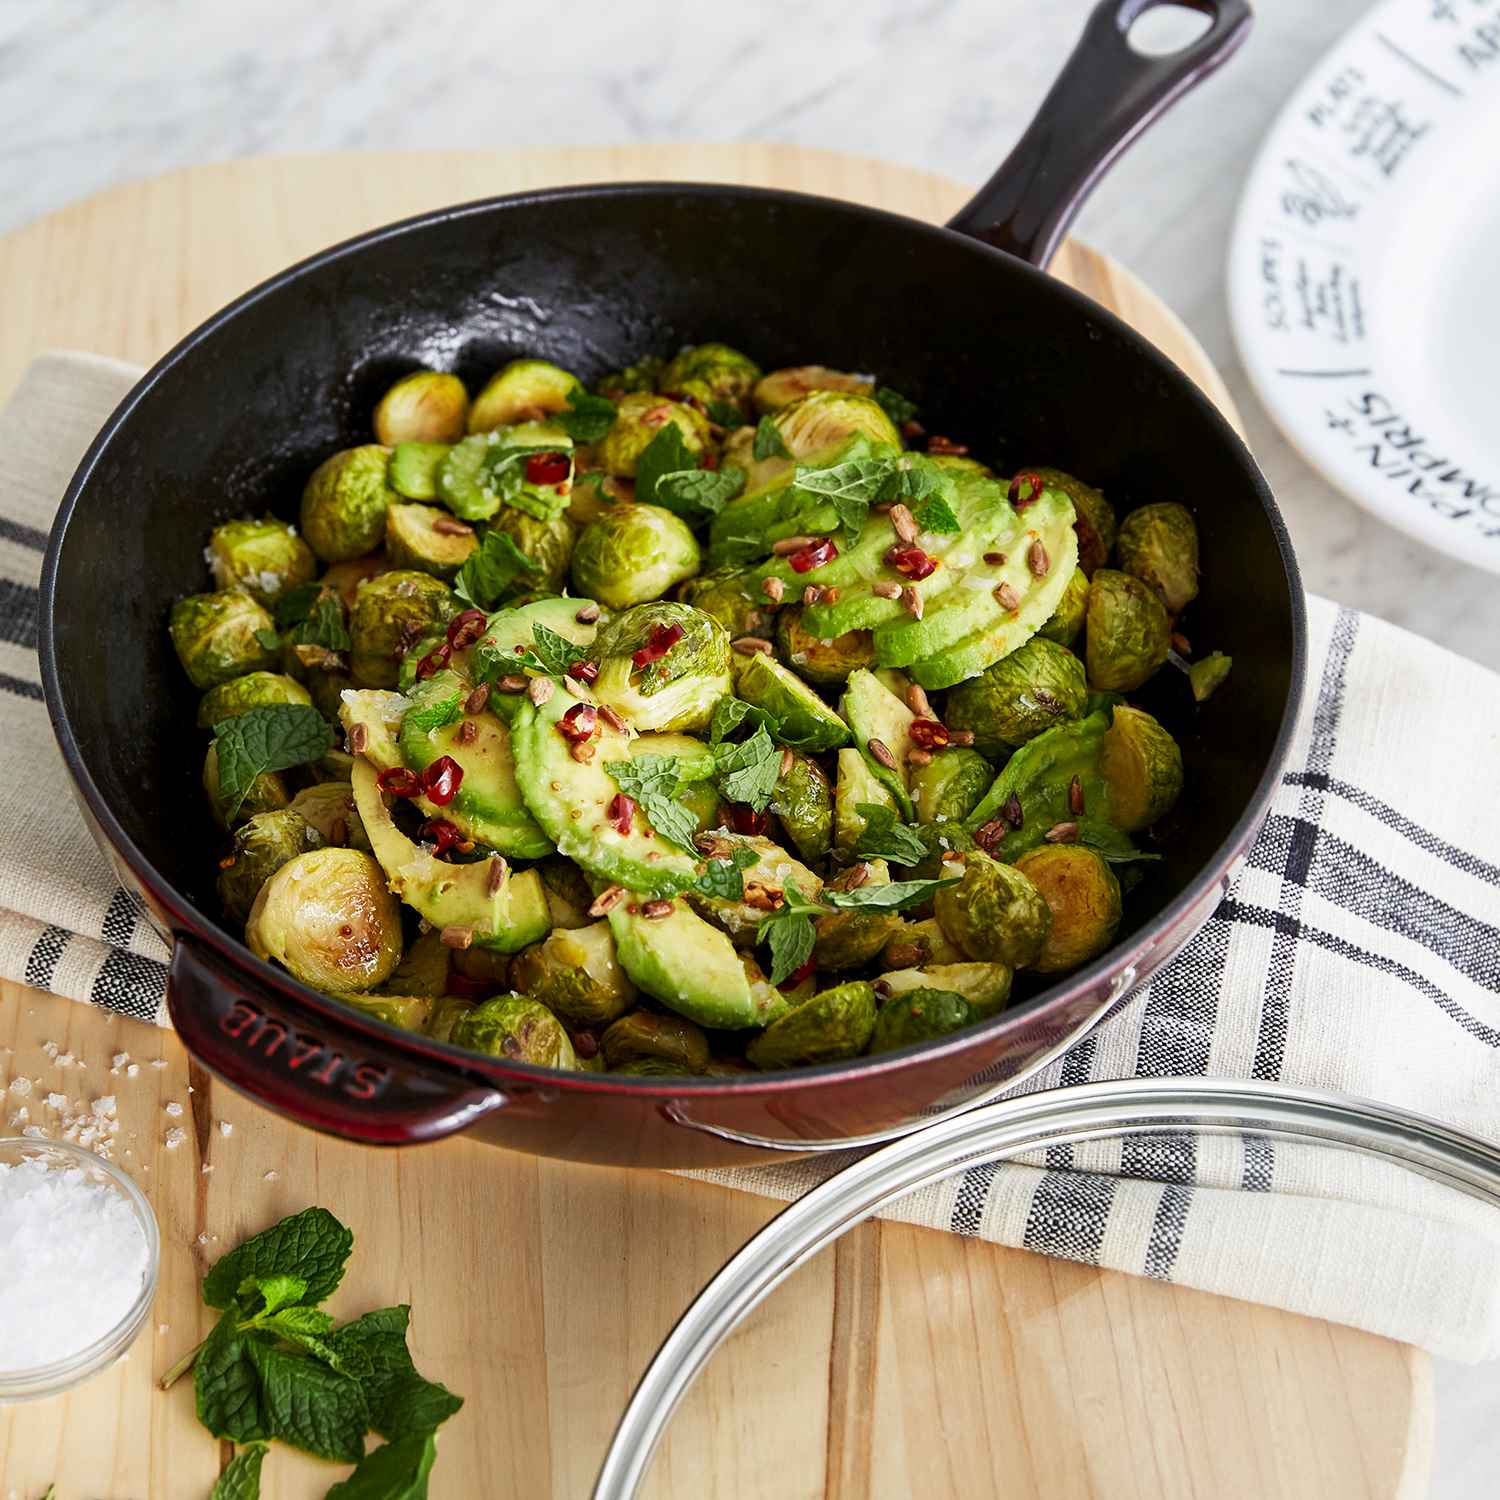 recipes with lime, lime recipes, brussels sprouts recipe